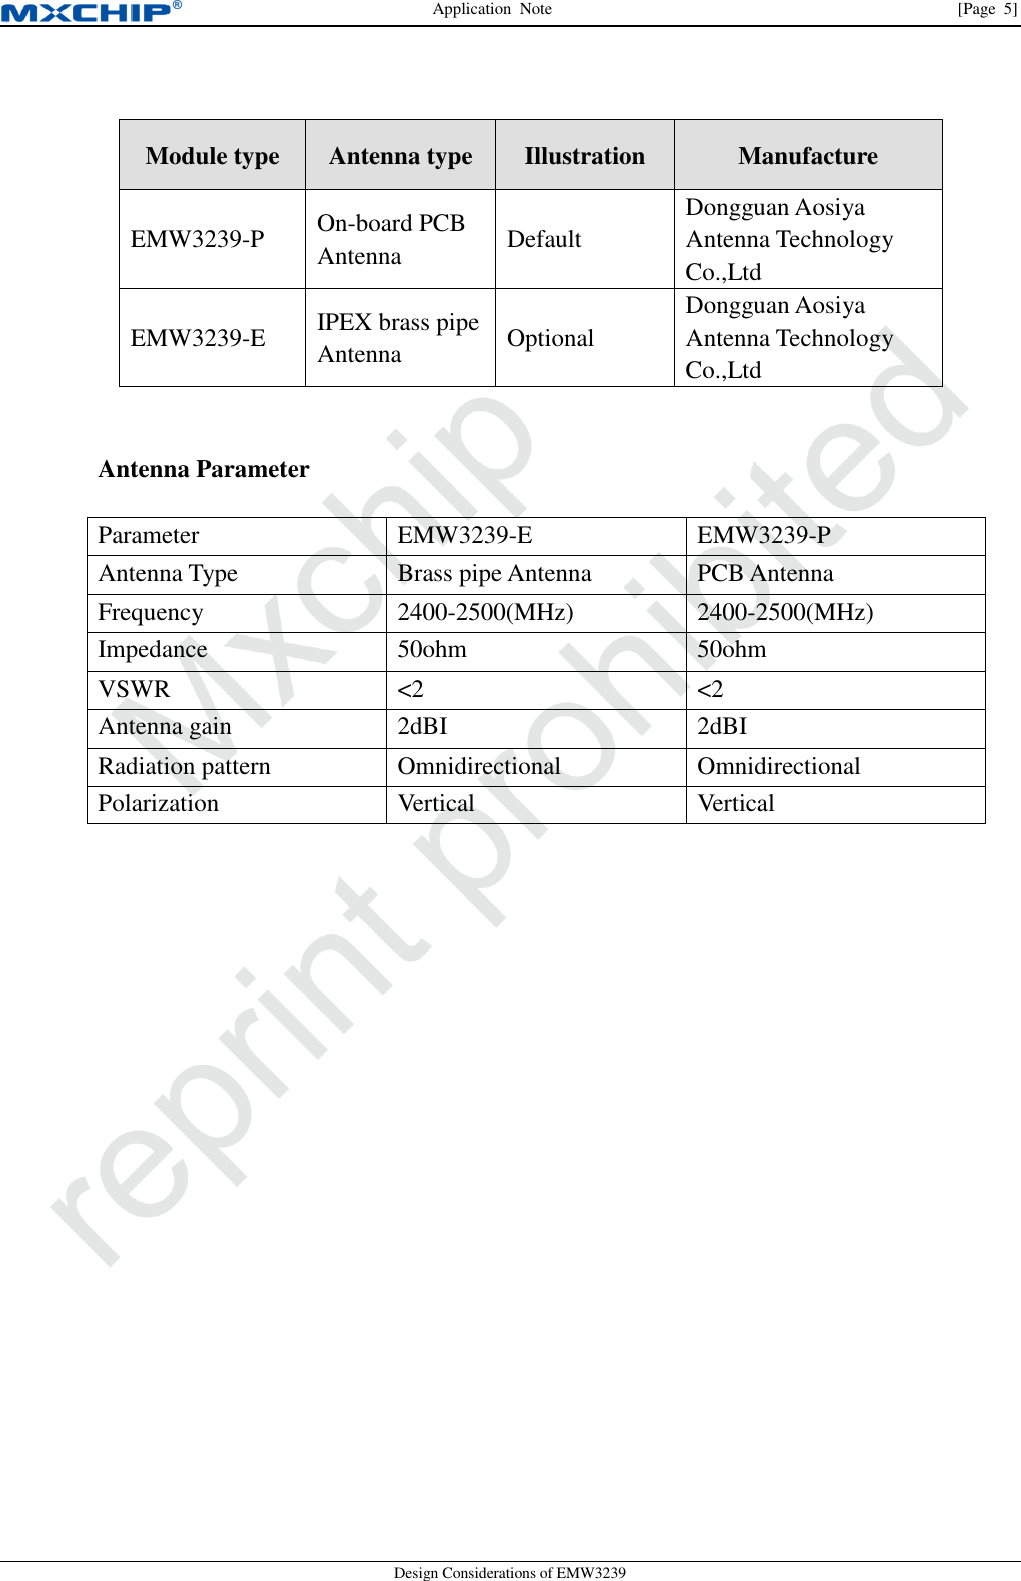 Application  Note  [Page  5] Design Considerations of EMW3239 Module type  Antenna type  Illustration  Manufacture EMW3239-P  On-board PCB Antenna  Default Dongguan Aosiya Antenna Technology Co.,Ltd EMW3239-E  IPEX brass pipe Antenna  Optional Dongguan Aosiya Antenna Technology Co.,Ltd Antenna Parameter Parameter  EMW3239-E  EMW3239-P Antenna Type  Brass pipe Antenna  PCB Antenna Frequency  2400-2500(MHz)  2400-2500(MHz) Impedance  50ohm  50ohm VSWR  &lt;2 &lt;2 Antenna gain  2dBI  2dBI Radiation pattern  Omnidirectional  Omnidirectional Polarization  Vertical  Vertical 